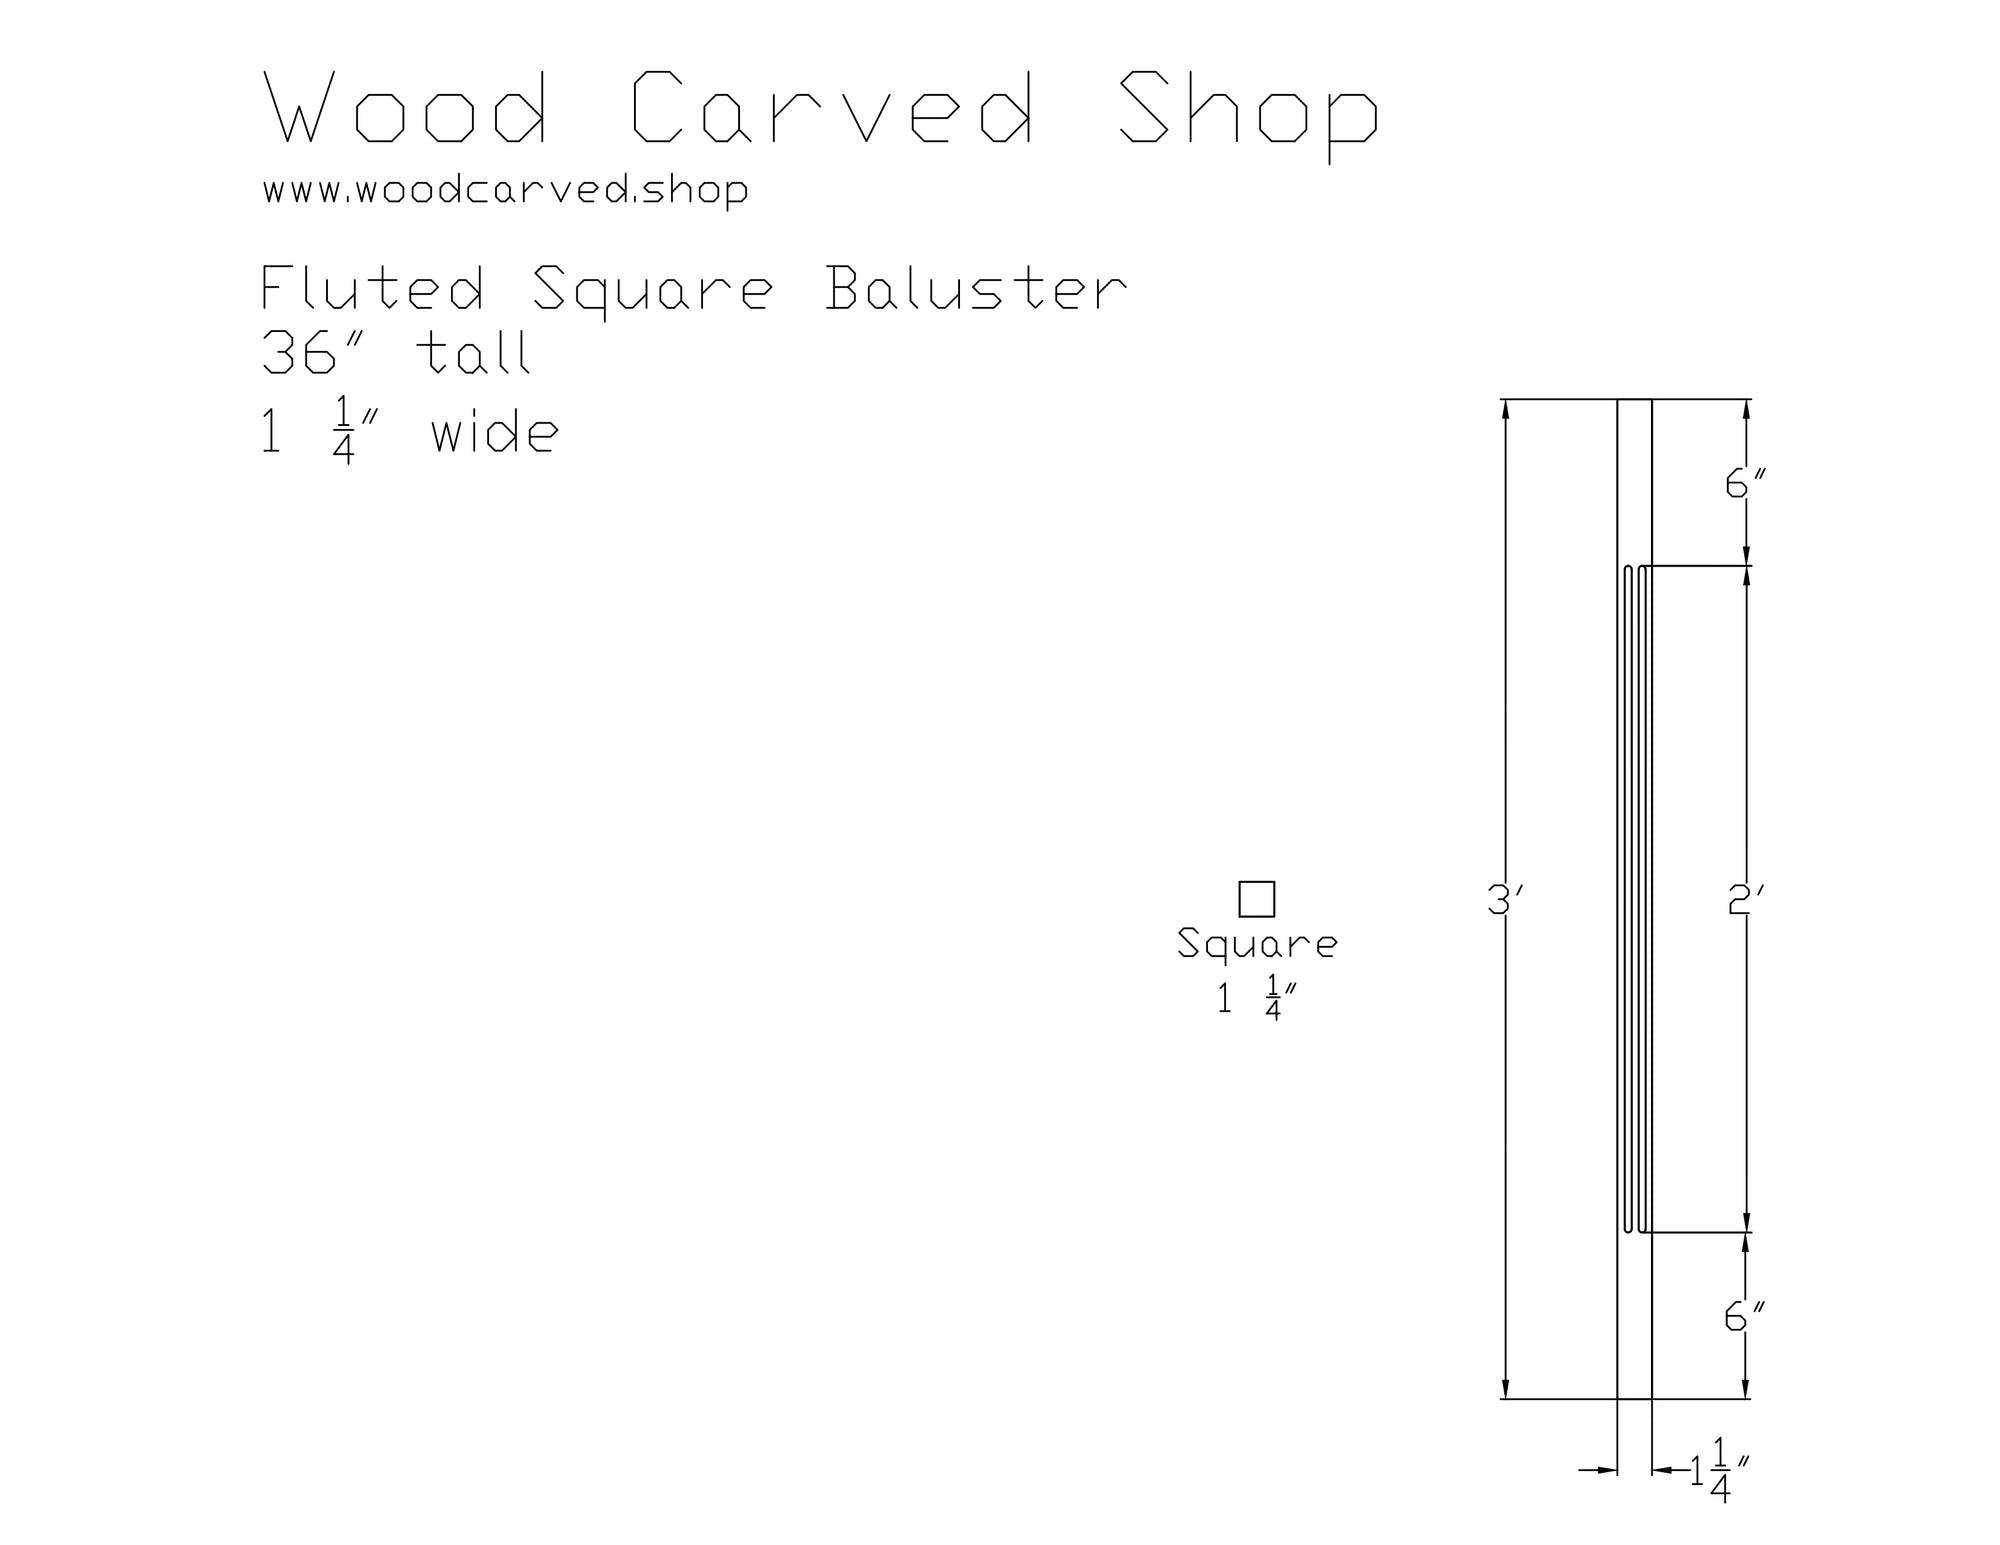 Fluted Square Baluster